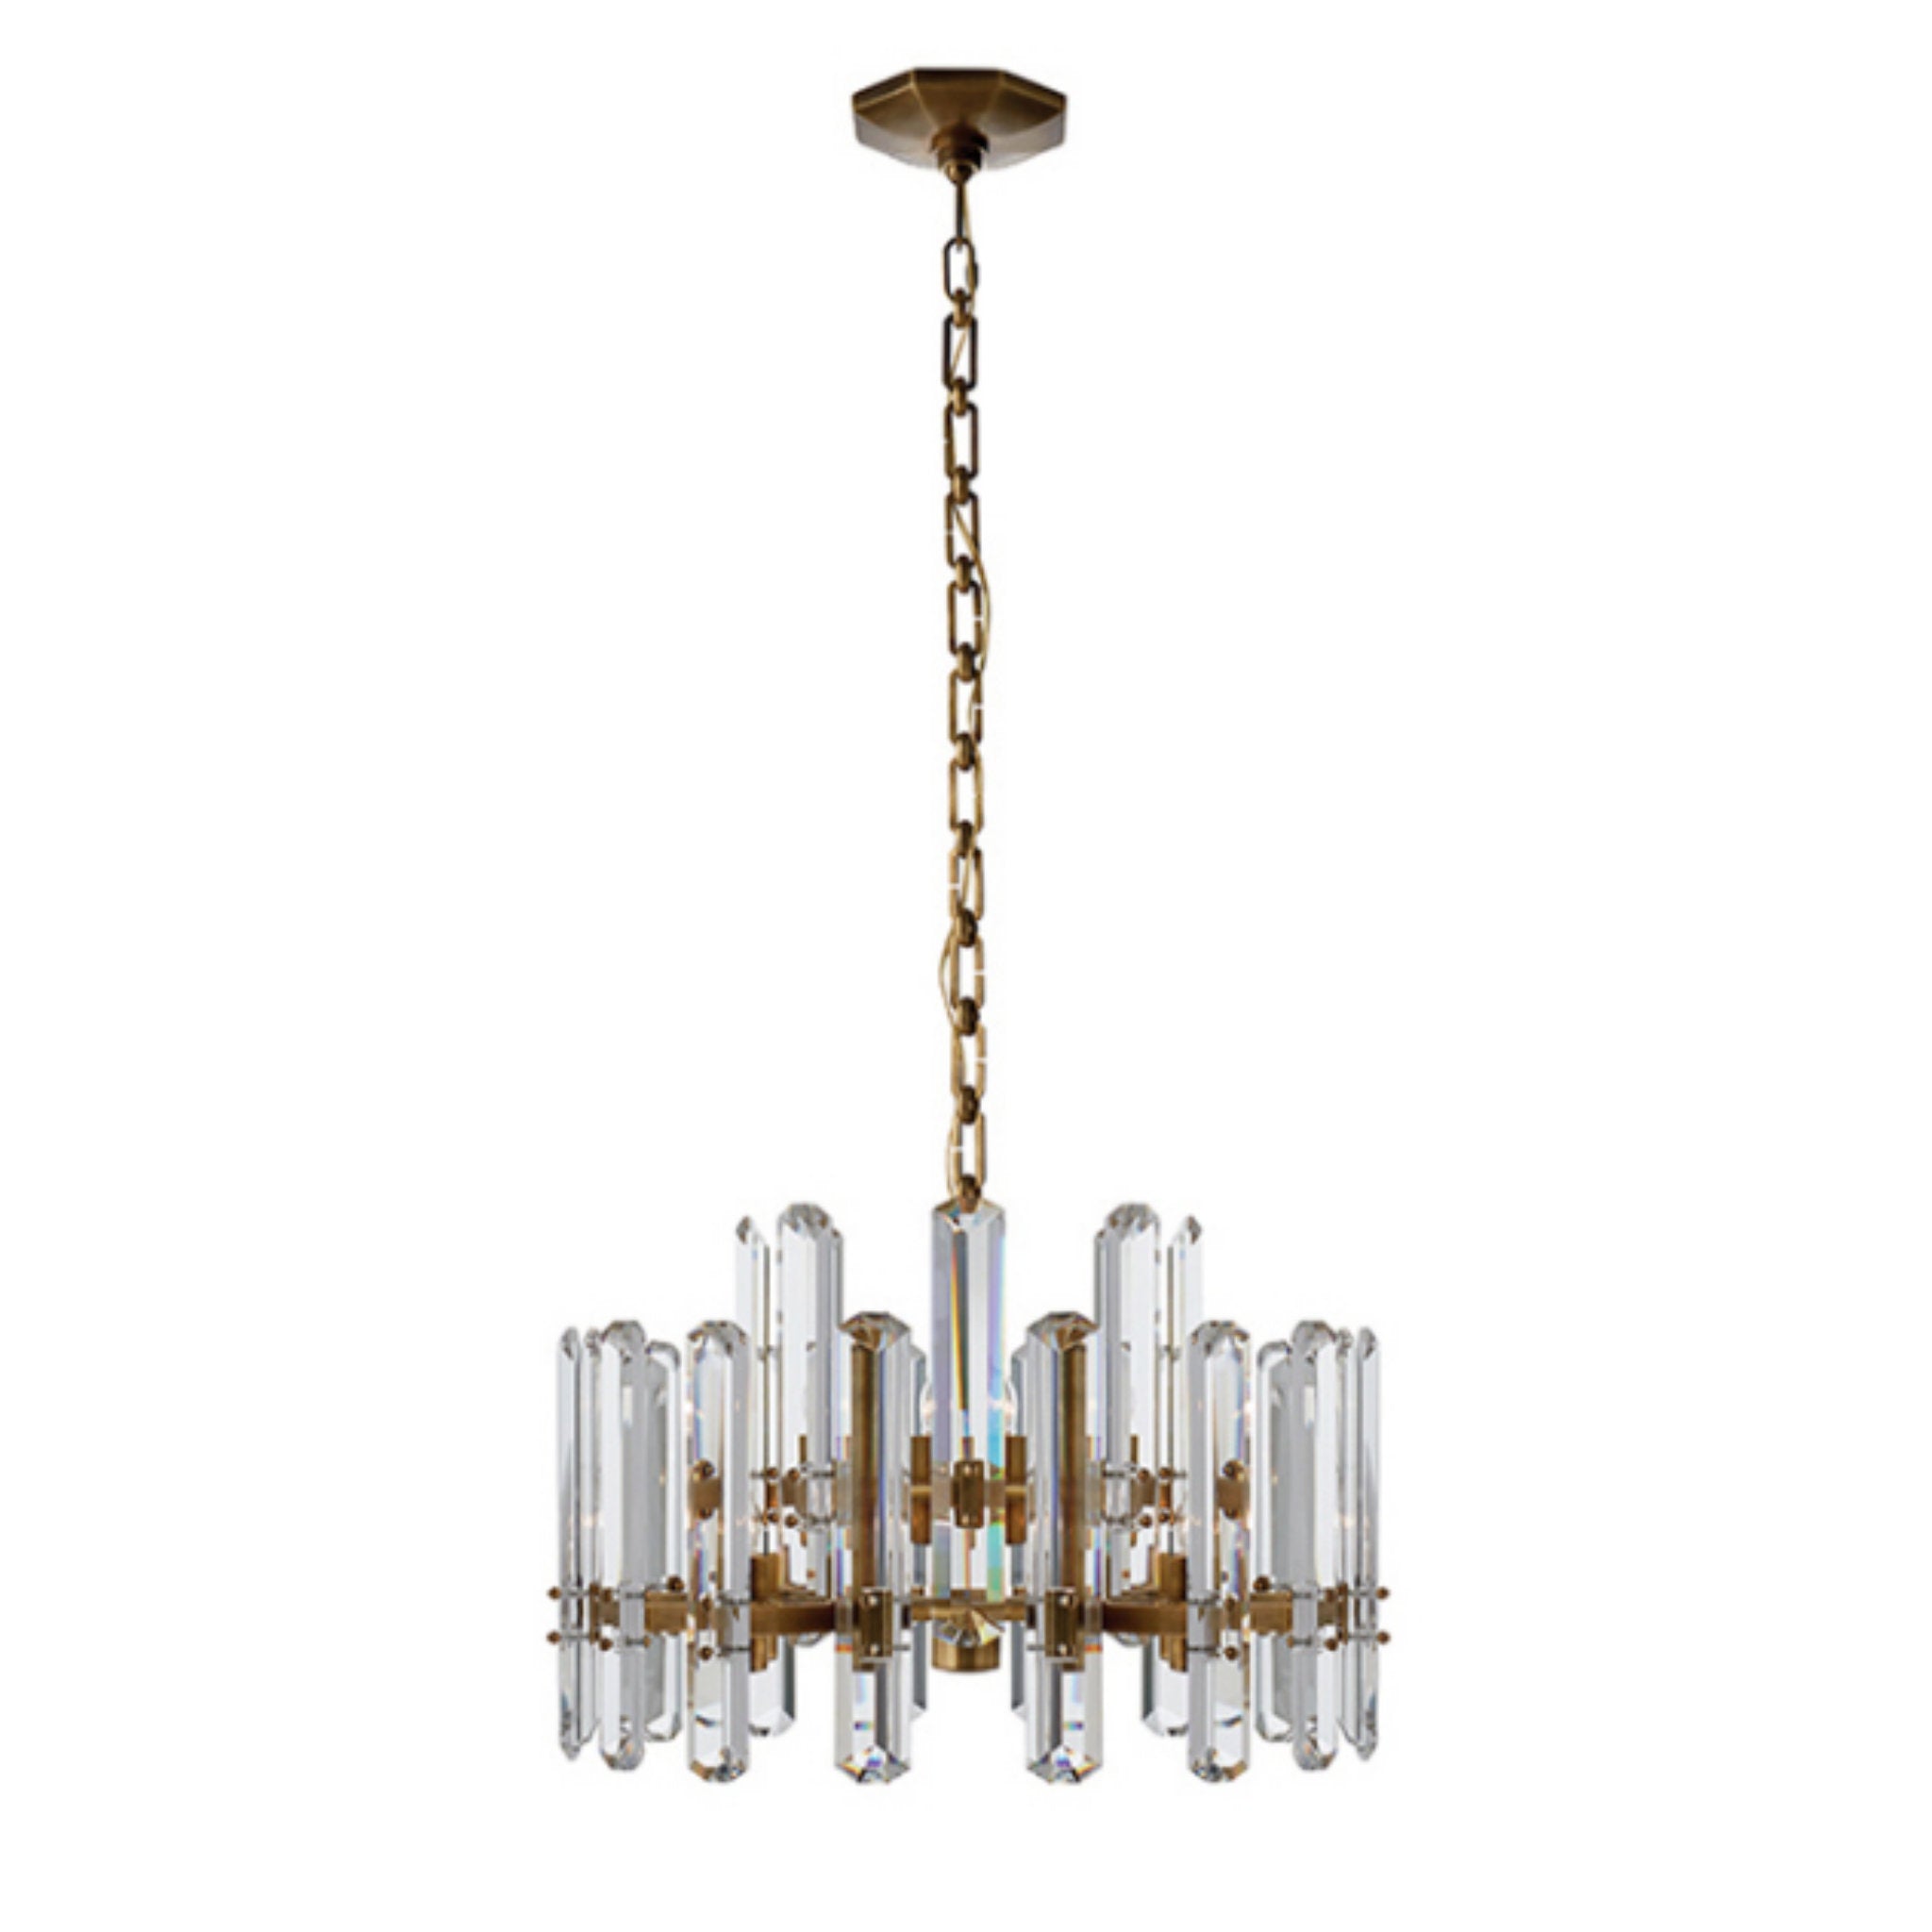 AERIN Bonnington Chandelier in Hand-Rubbed Antique Brass with Crystal